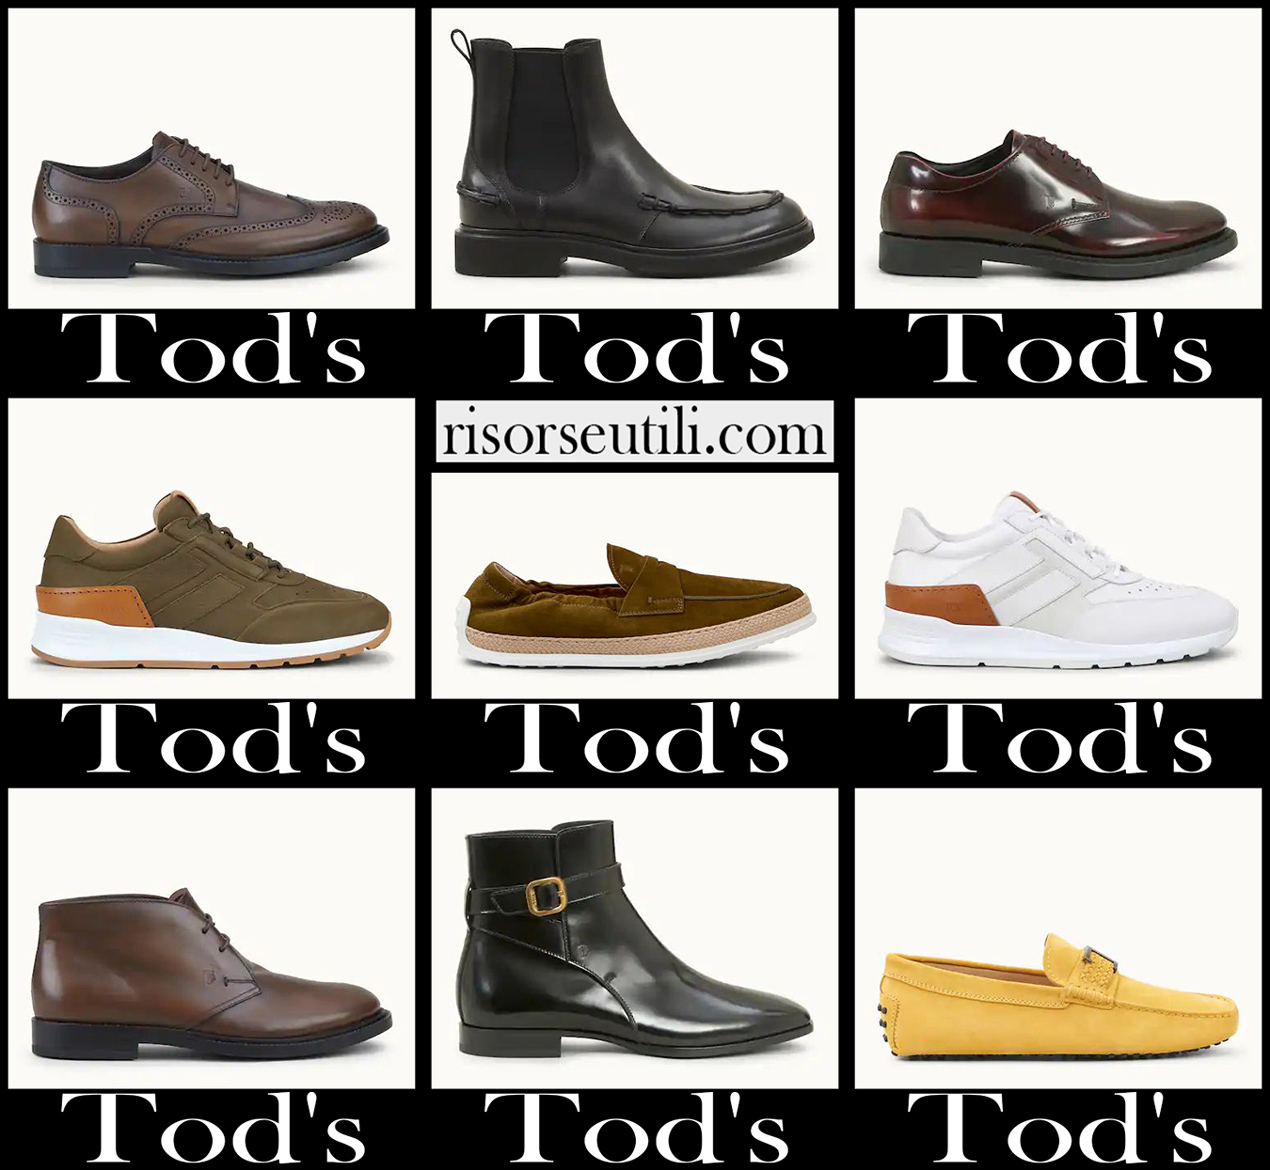 New arrivals Tods shoes 2021 mens footwear